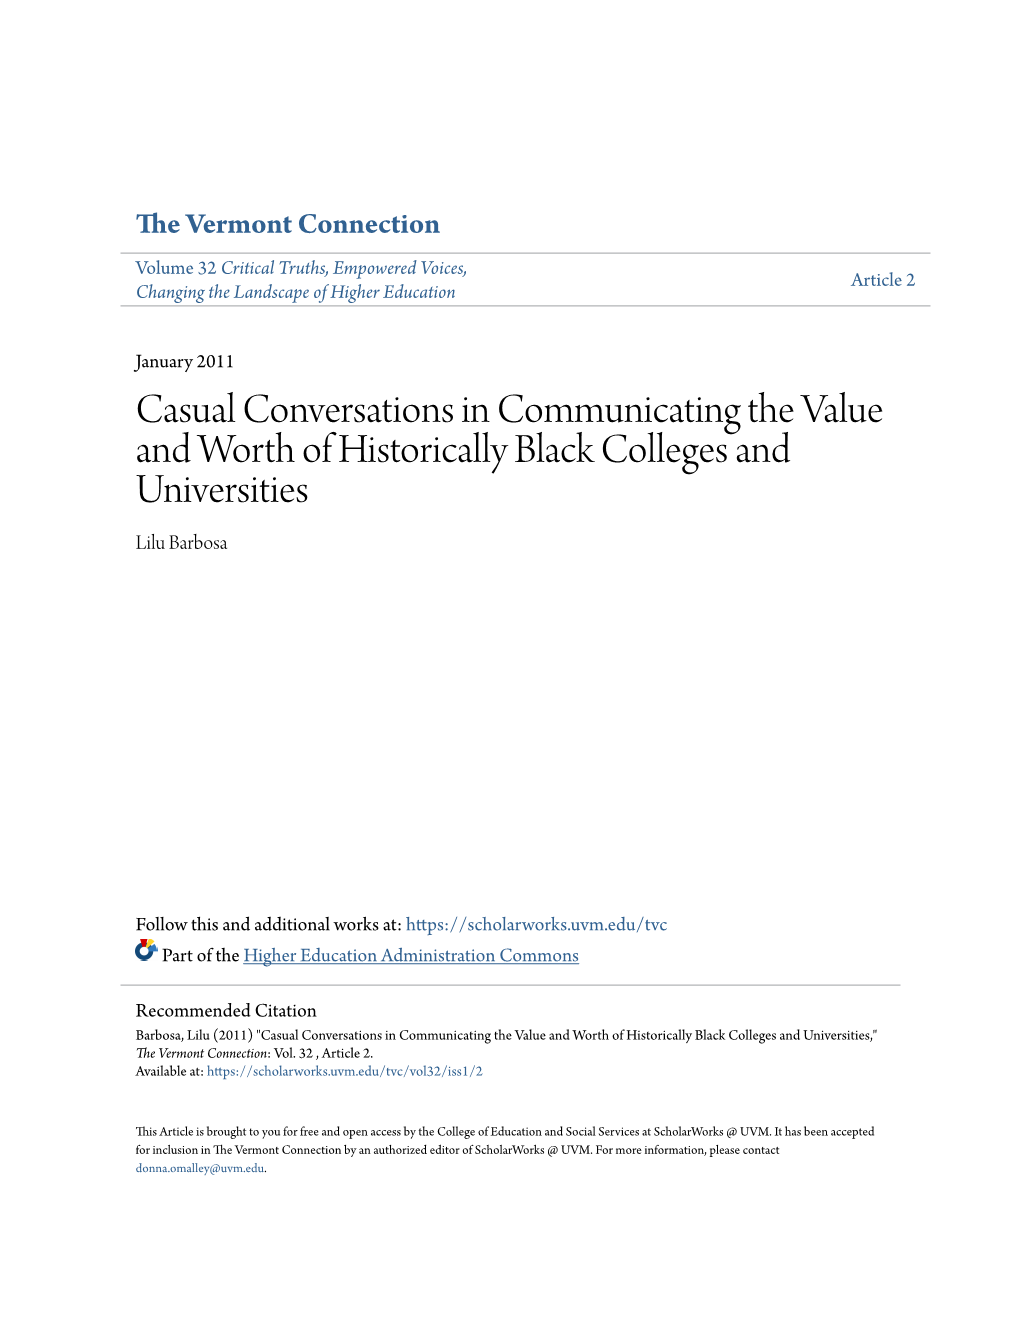 Casual Conversations in Communicating the Value and Worth of Historically Black Colleges and Universities Lilu Barbosa